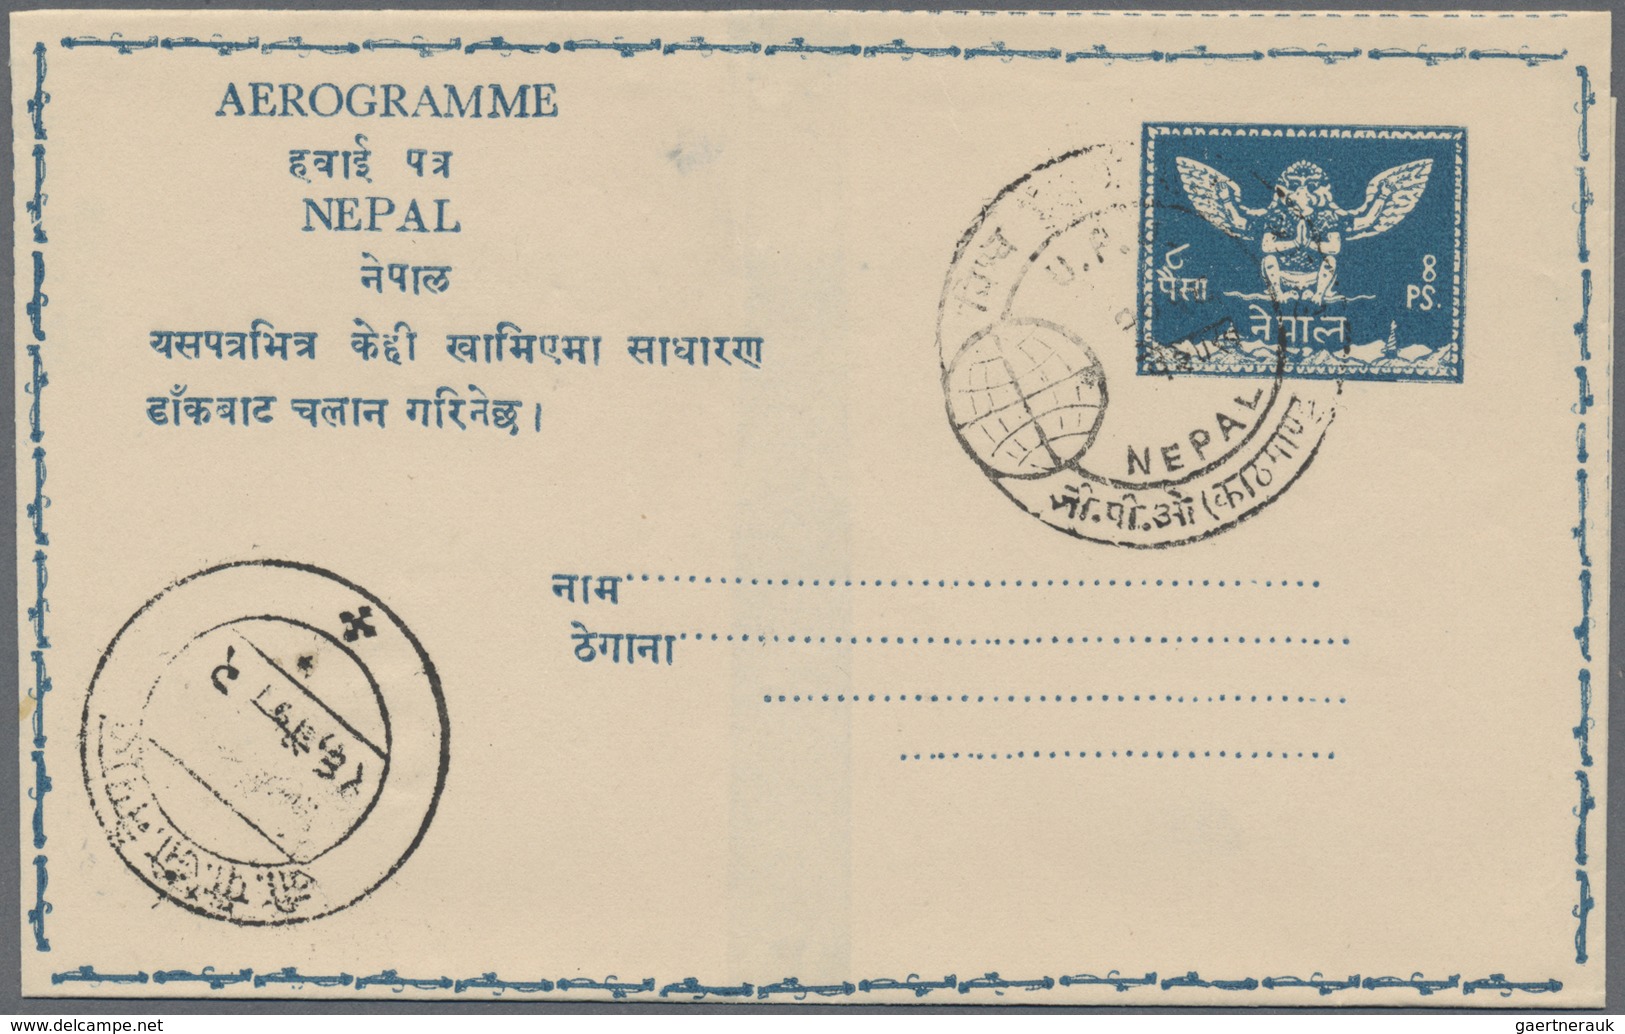 GA Nepal: 1959 Five Aerogrammes 8p. Blue, Type 1 (without Corner Ornaments), All Different In Wmk, One - Nepal